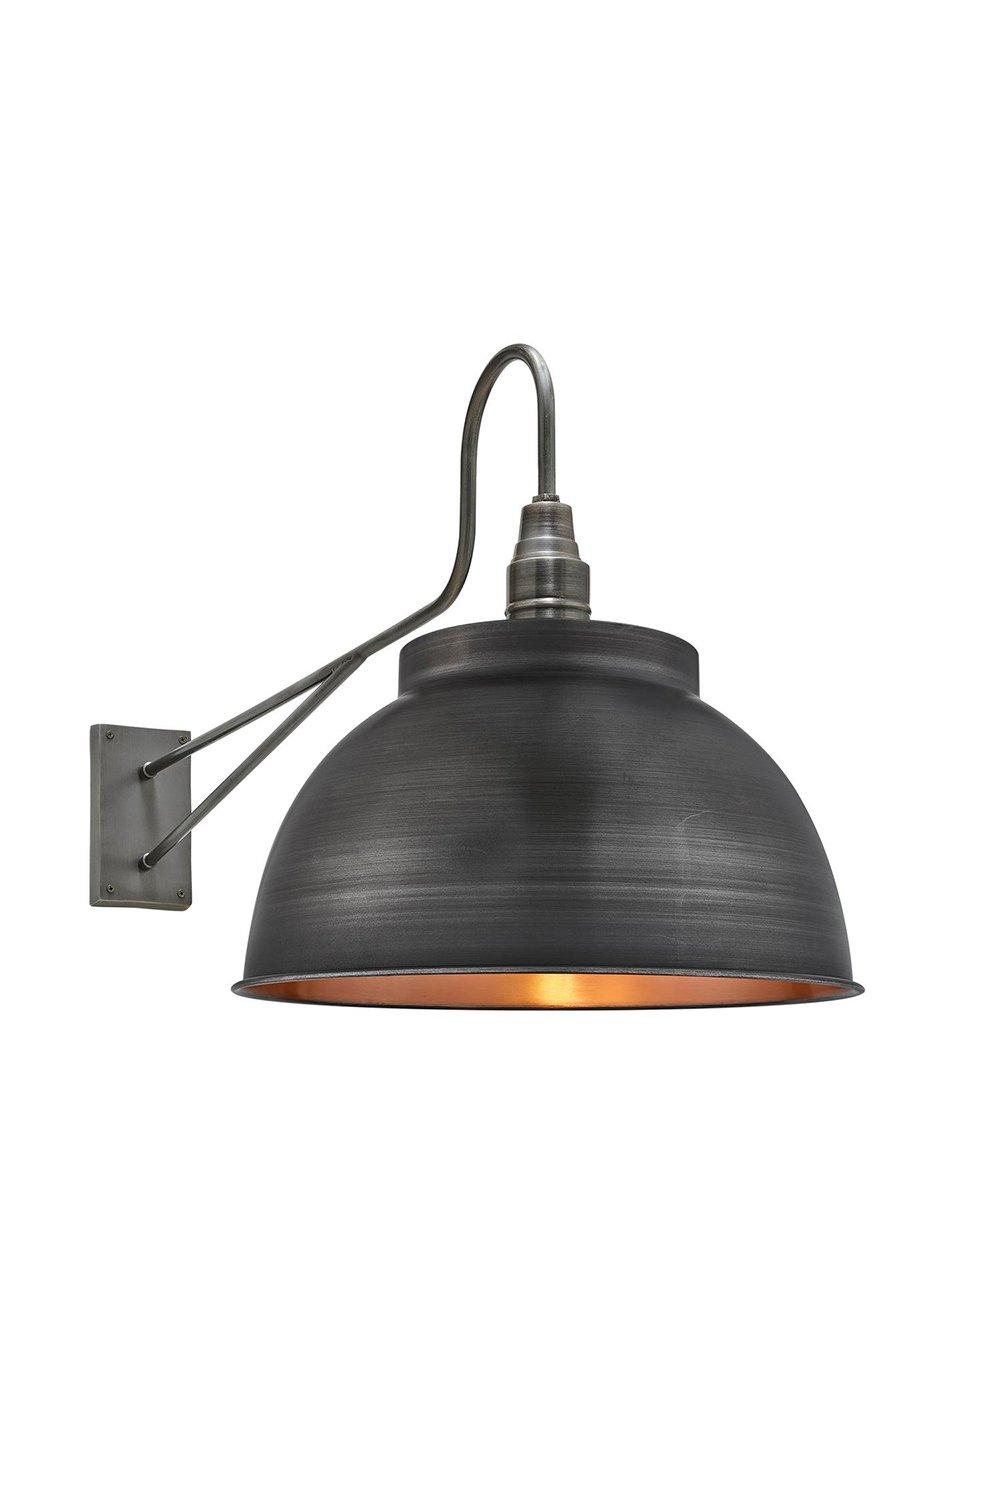 Long Arm Dome Wall Light, 17 Inch, Pewter & Copper, Pewter Holder